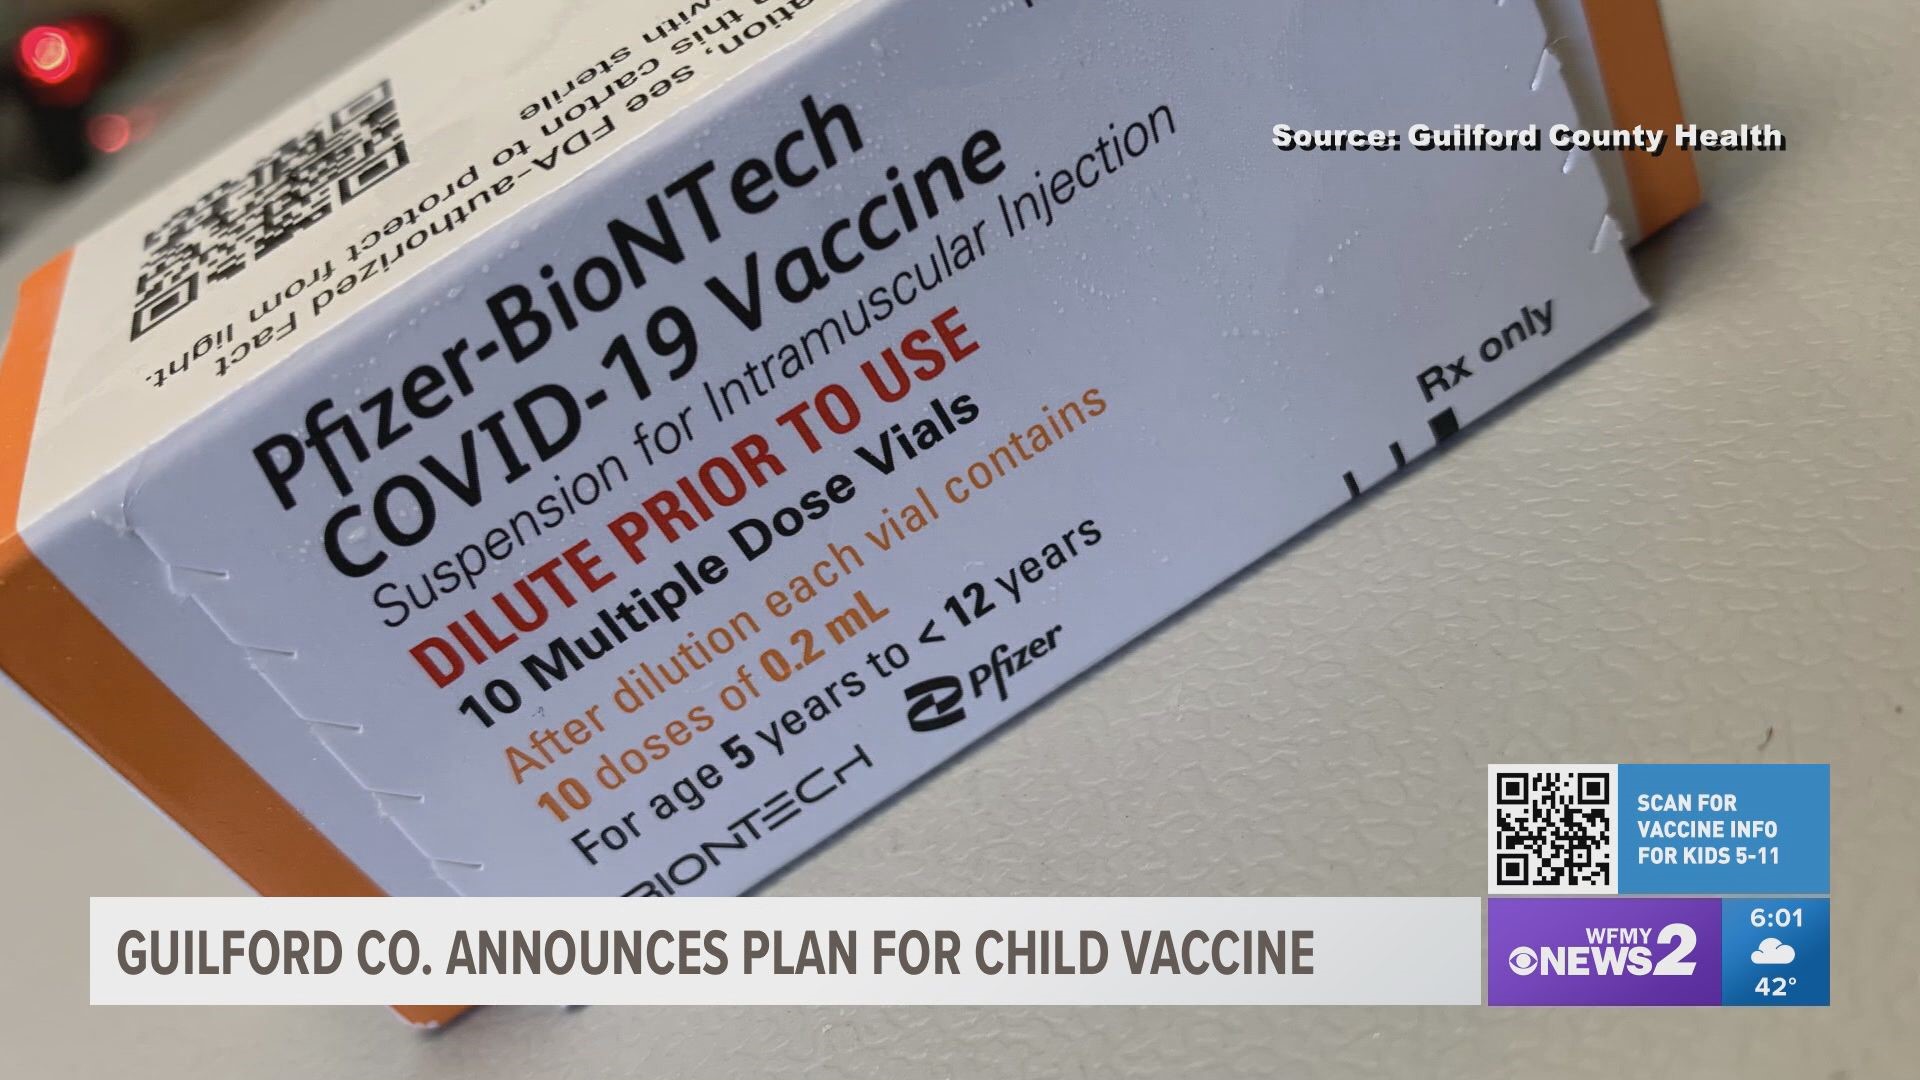 With the Pfizer vaccine approved for children 5 to 11 years old, the Guilford County health department is updating its plan to get children vaccinated.